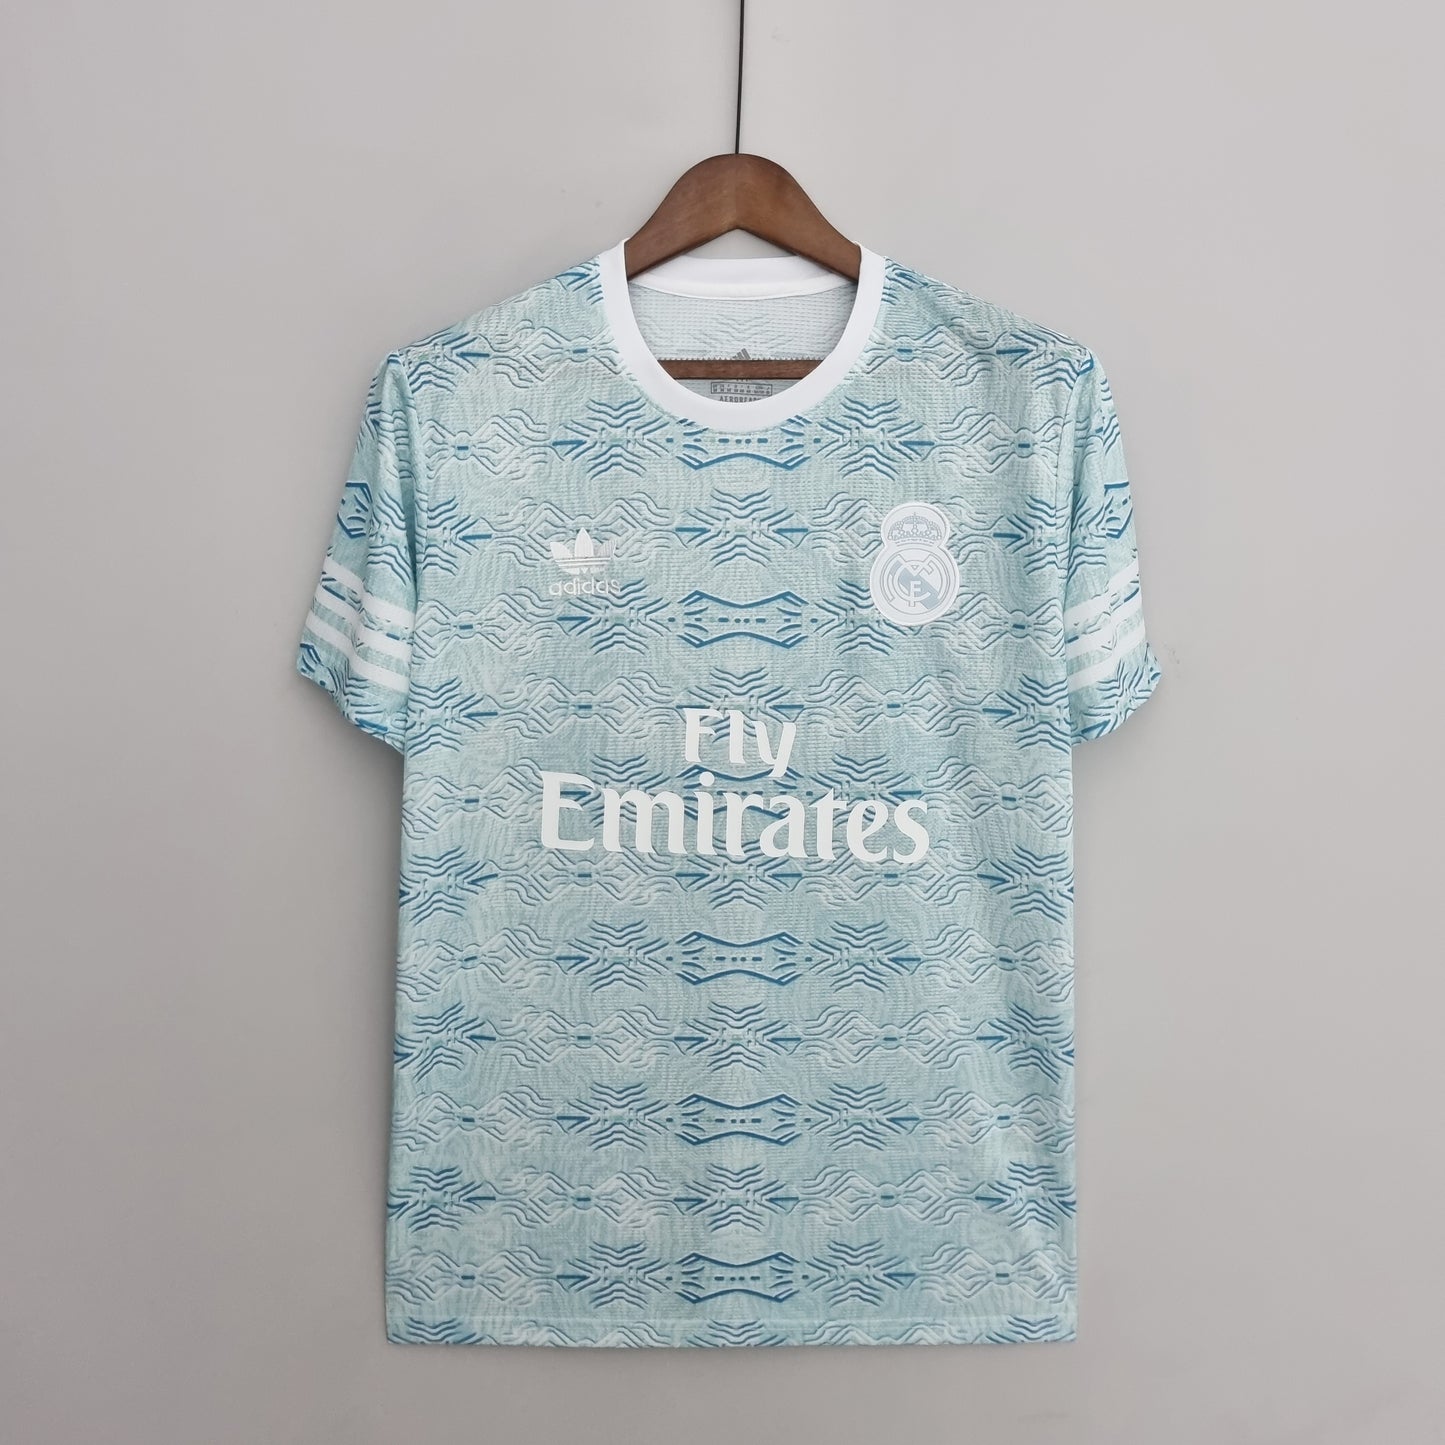 Real Madrid Special Edition Shirt